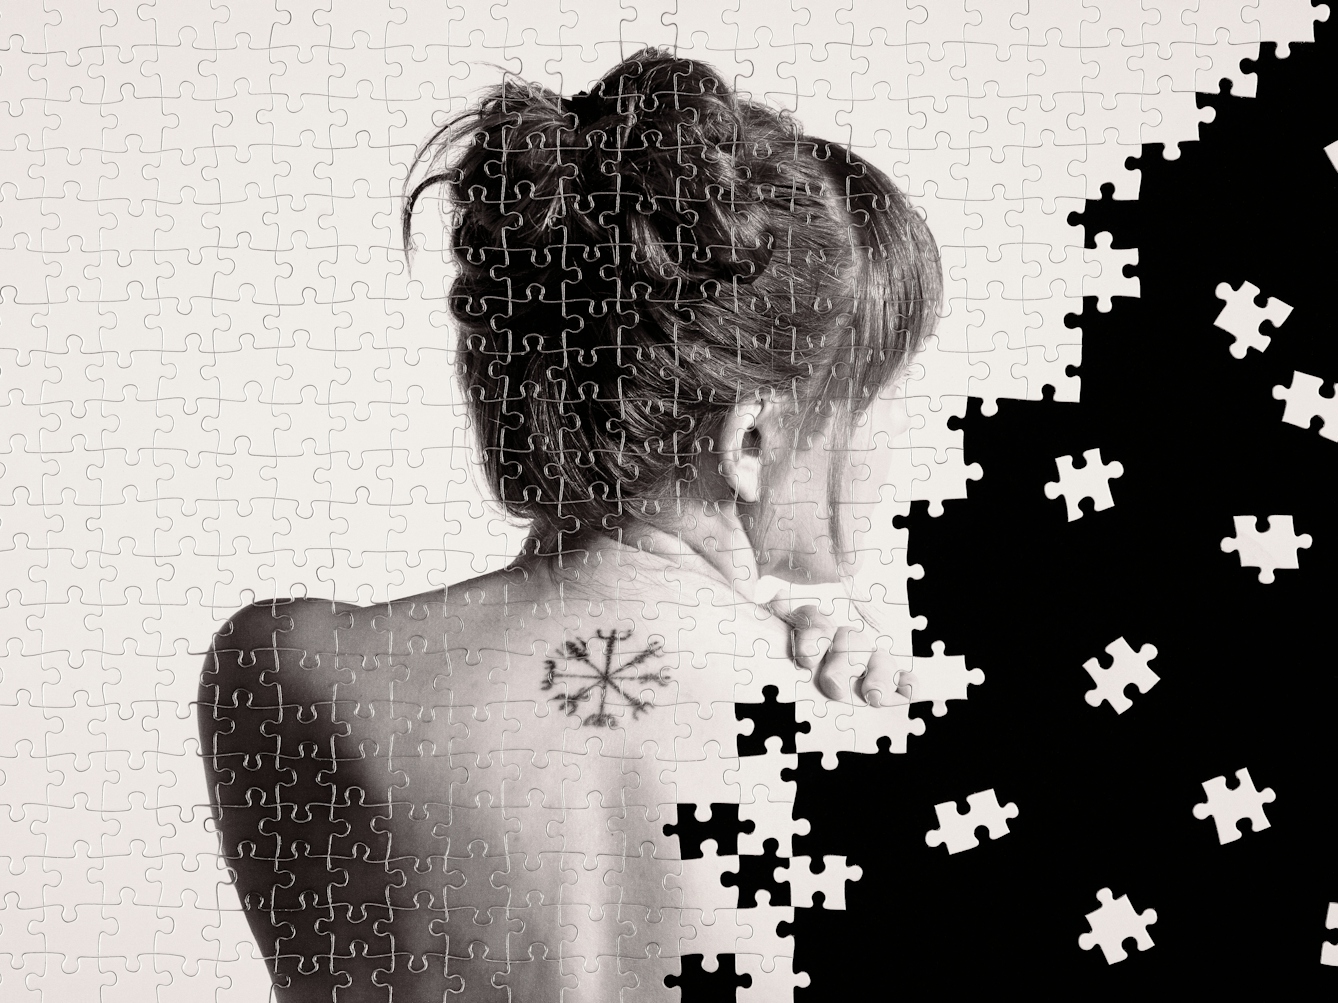 Photograph of a part made jigsaw puzzle containing hundreds of pieces. The jigsaw has been photographed against a black background, with many of the unused pieces scattered around in the black space. The image on the jigsaw is a warmed toned, monotone photograph of a nude woman against a plain light background. The woman is pictured from behind, showing the top half of her back and her head which is turned to the right. She has long hair tied in a bun and her left hand can been seen resting on her right shoulder. Between her shoulder blades is a tattoo in the shape of 4 long lines crossing each other at the centre of each line, with fork-like patterns on the end of each line. The missing jigsaw pieces create a black void which encroaches from the right side of the image, fragmenting the picture of the woman.